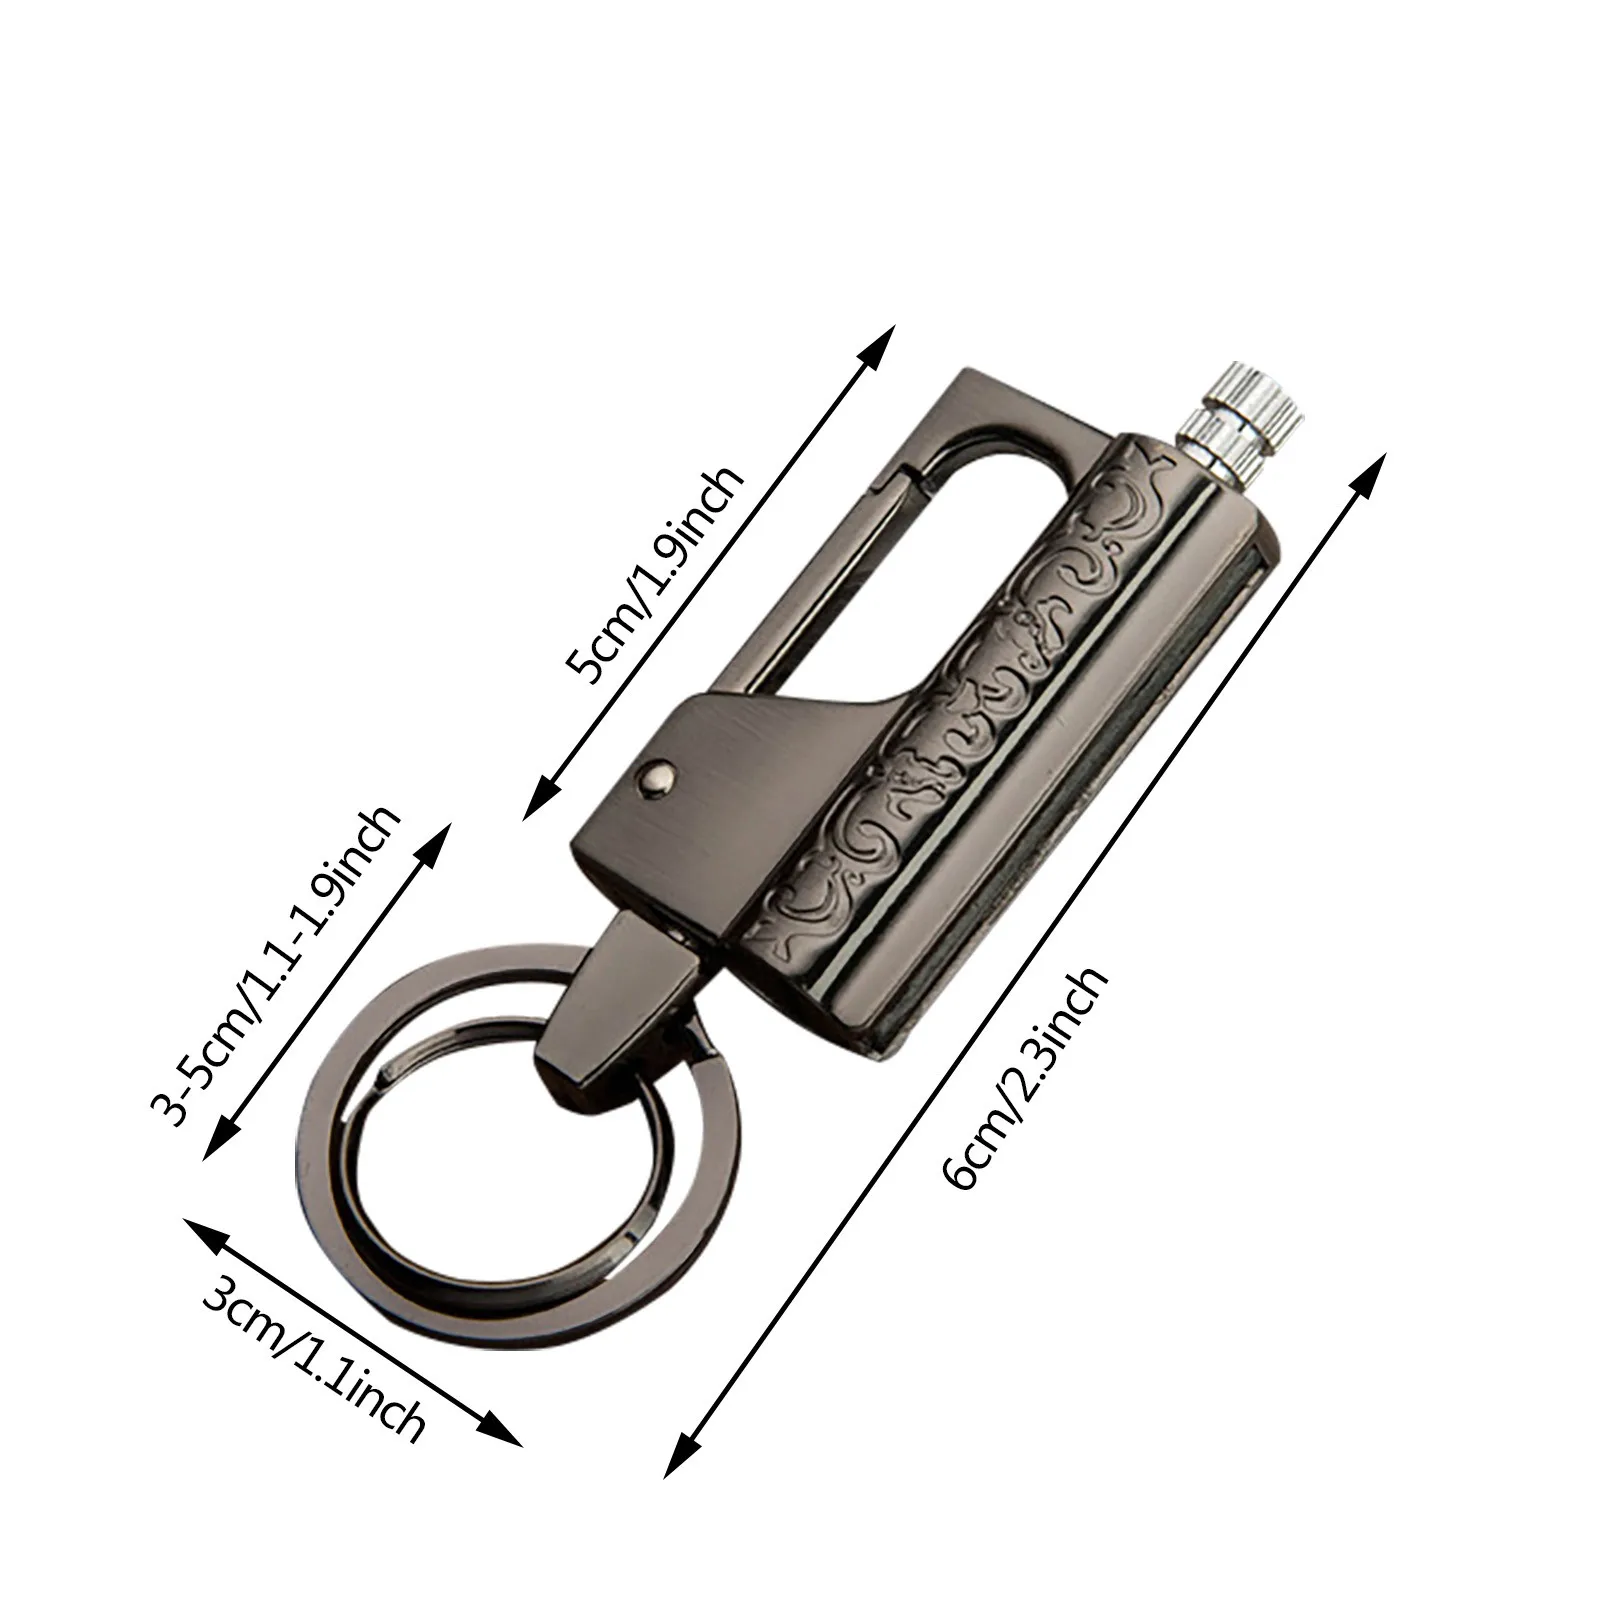 

Portable Outdoor Waterproof Lighter Bottle Keychain With Containing Cotton Core Delicate Convenient tool